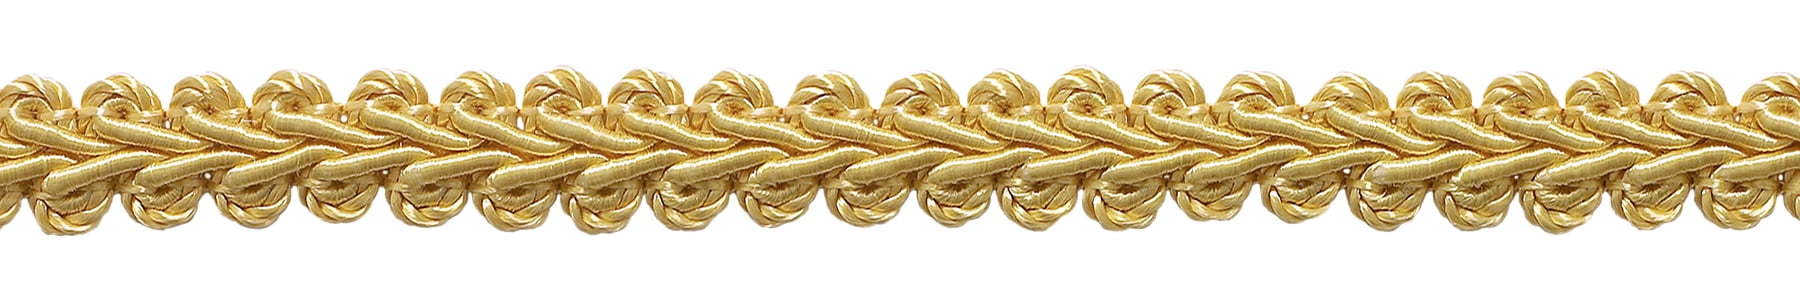 Bronze 14 Yards of Beautiful 1/2 Wide French Style Braid Gimp Trim ~ Your Choice of 12 Colors 